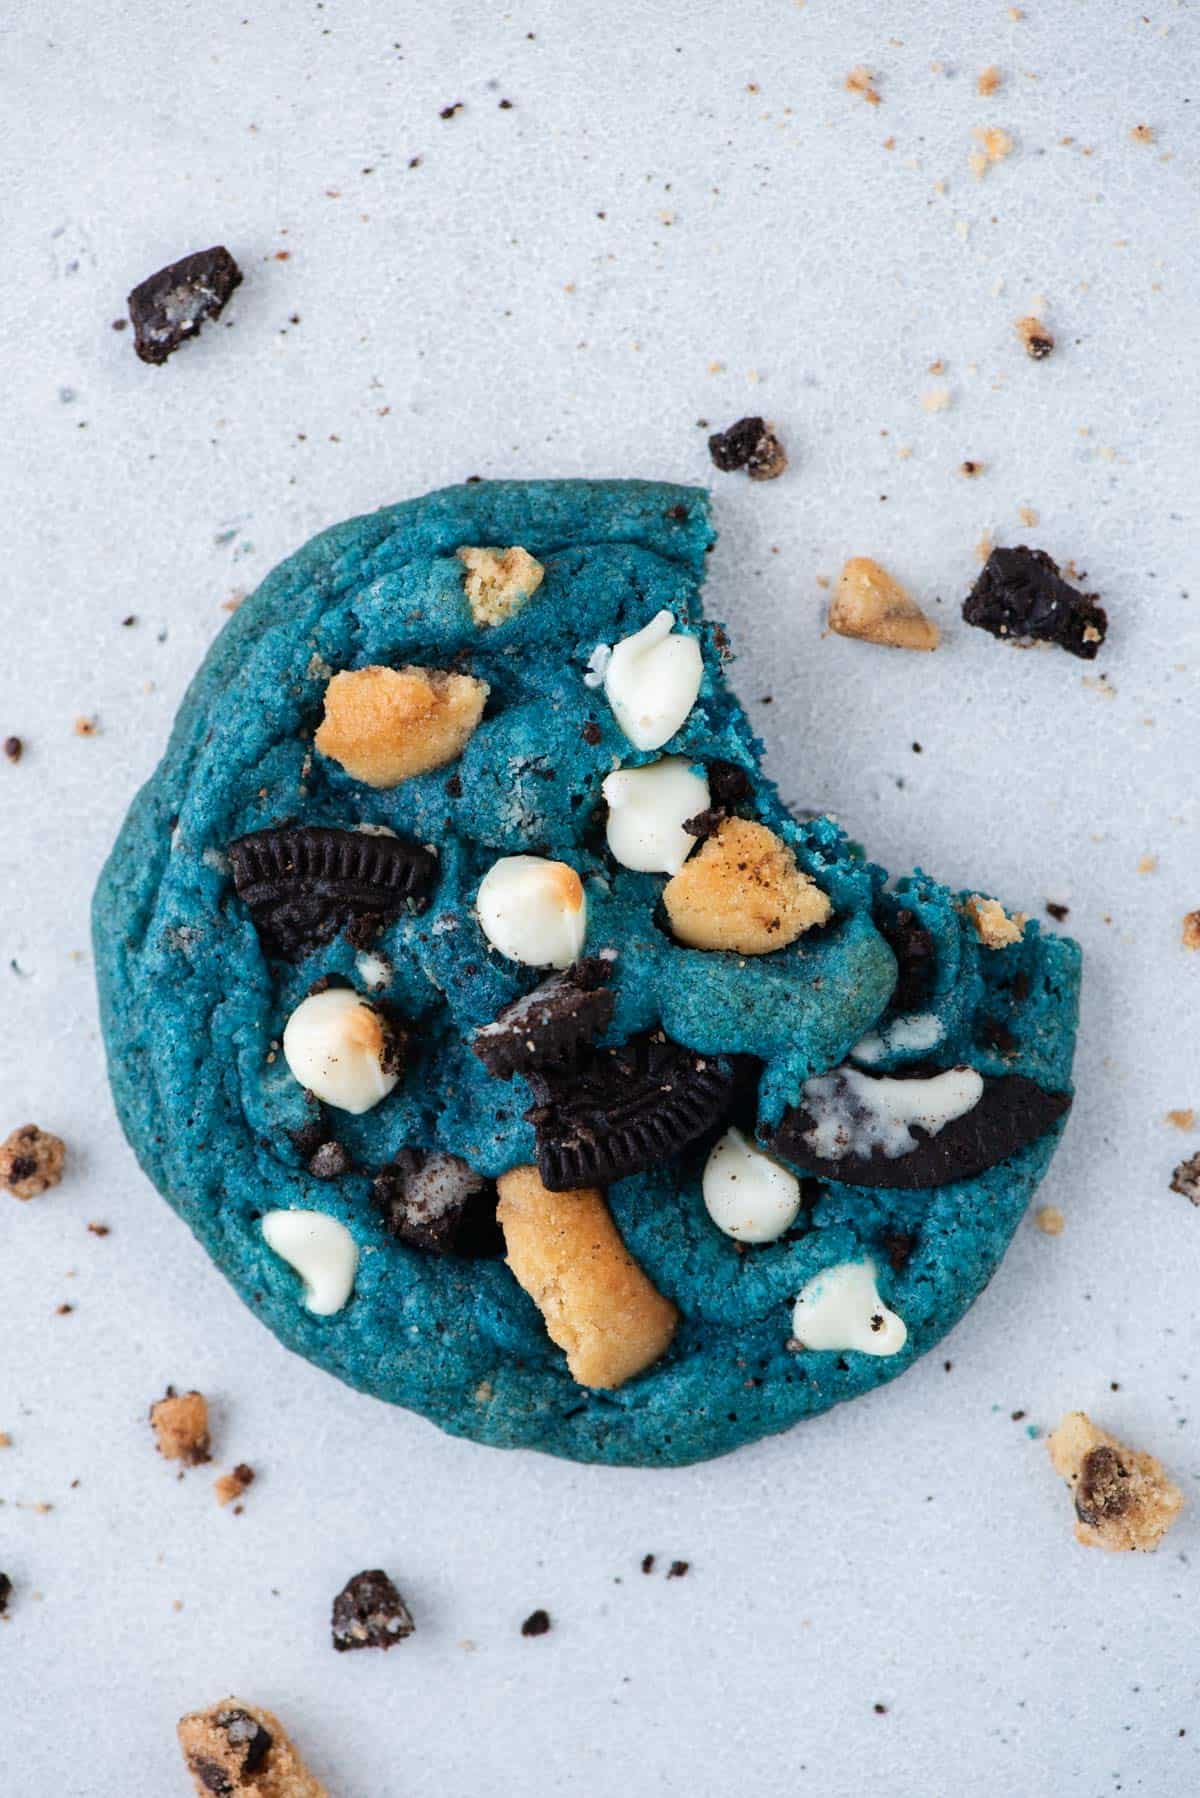 One cookie monster cookie with a bite taken out of it surrounded by cookie crumbs